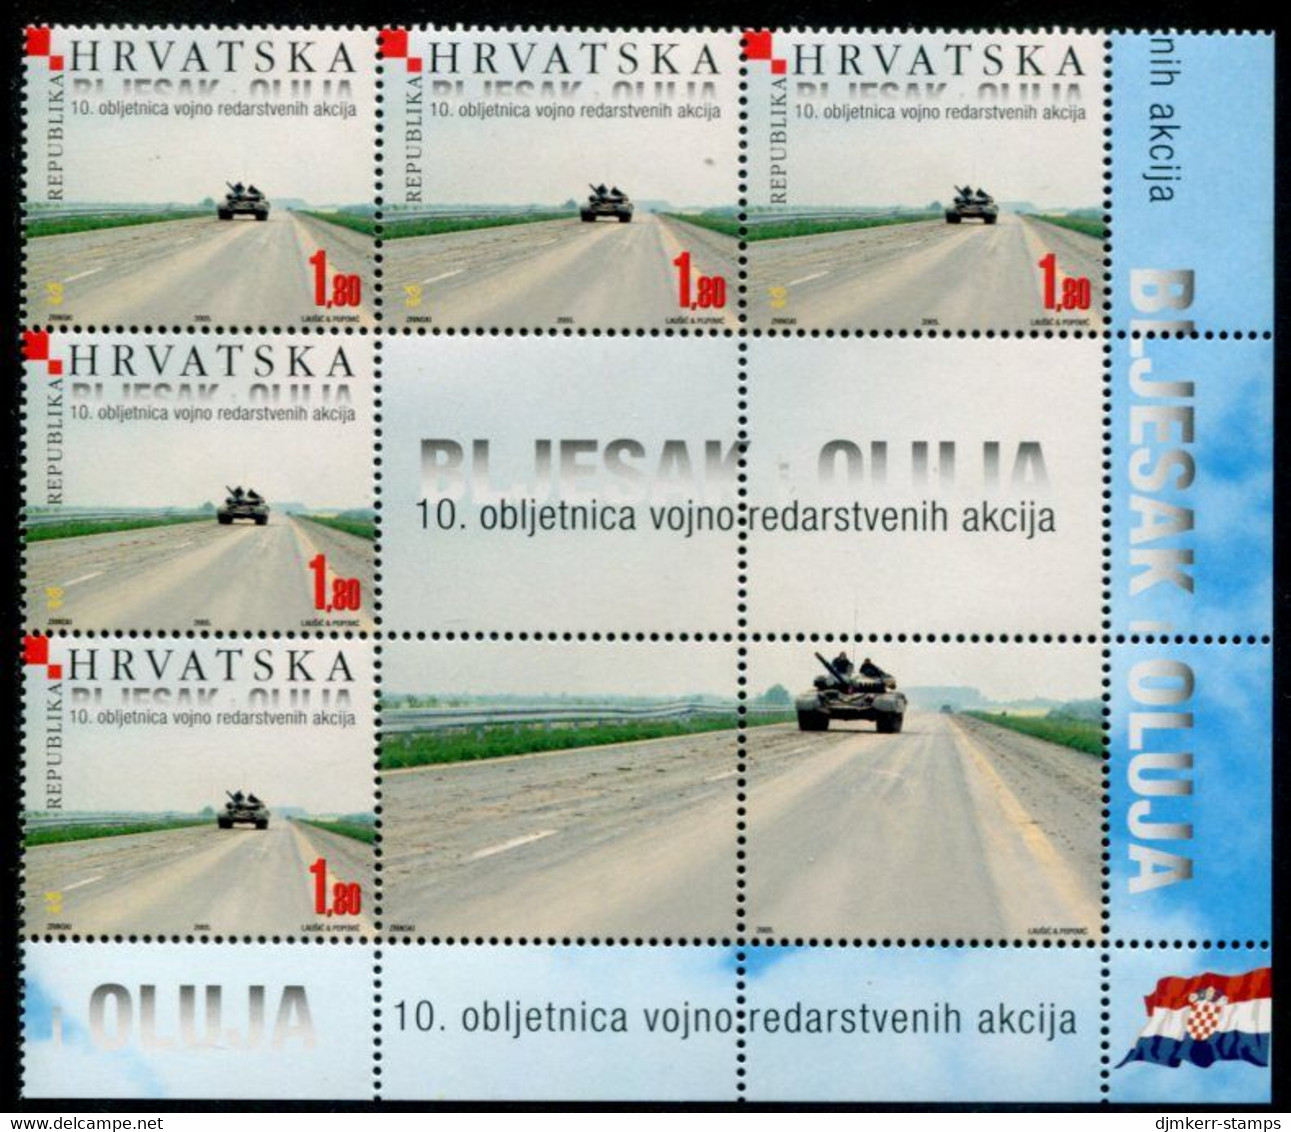 CROATIA 2005 10th Anniversary Of Military Campaigns Block Of 5 + Labels MNH / **.  Michel 716 - Croatie